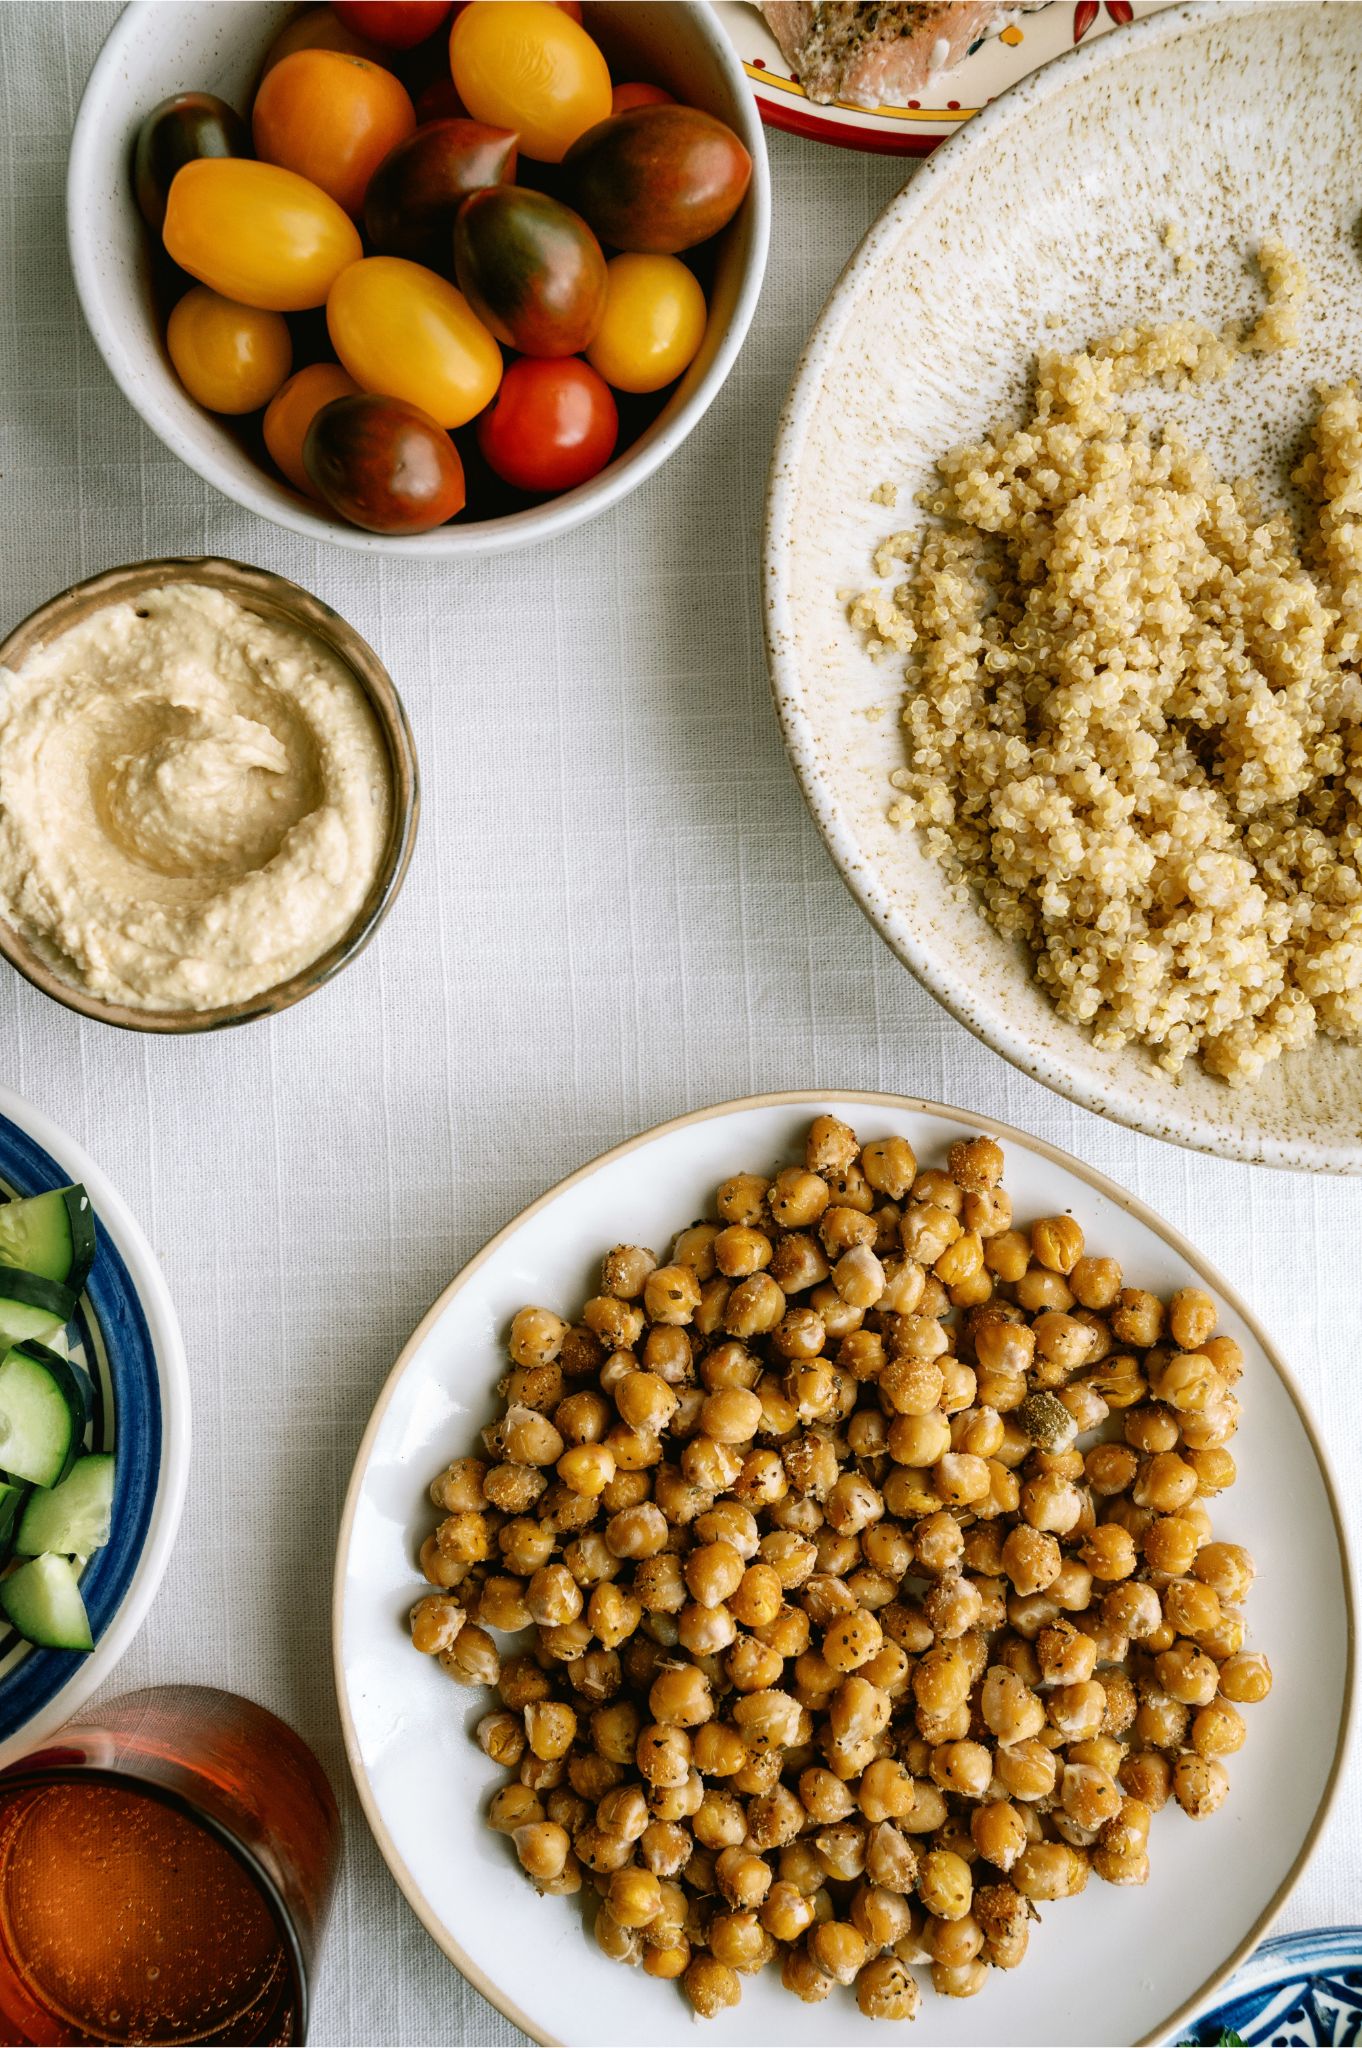 A bowl of quinoa, a bowl of tomatoes and a bowl of toasted chickpeas